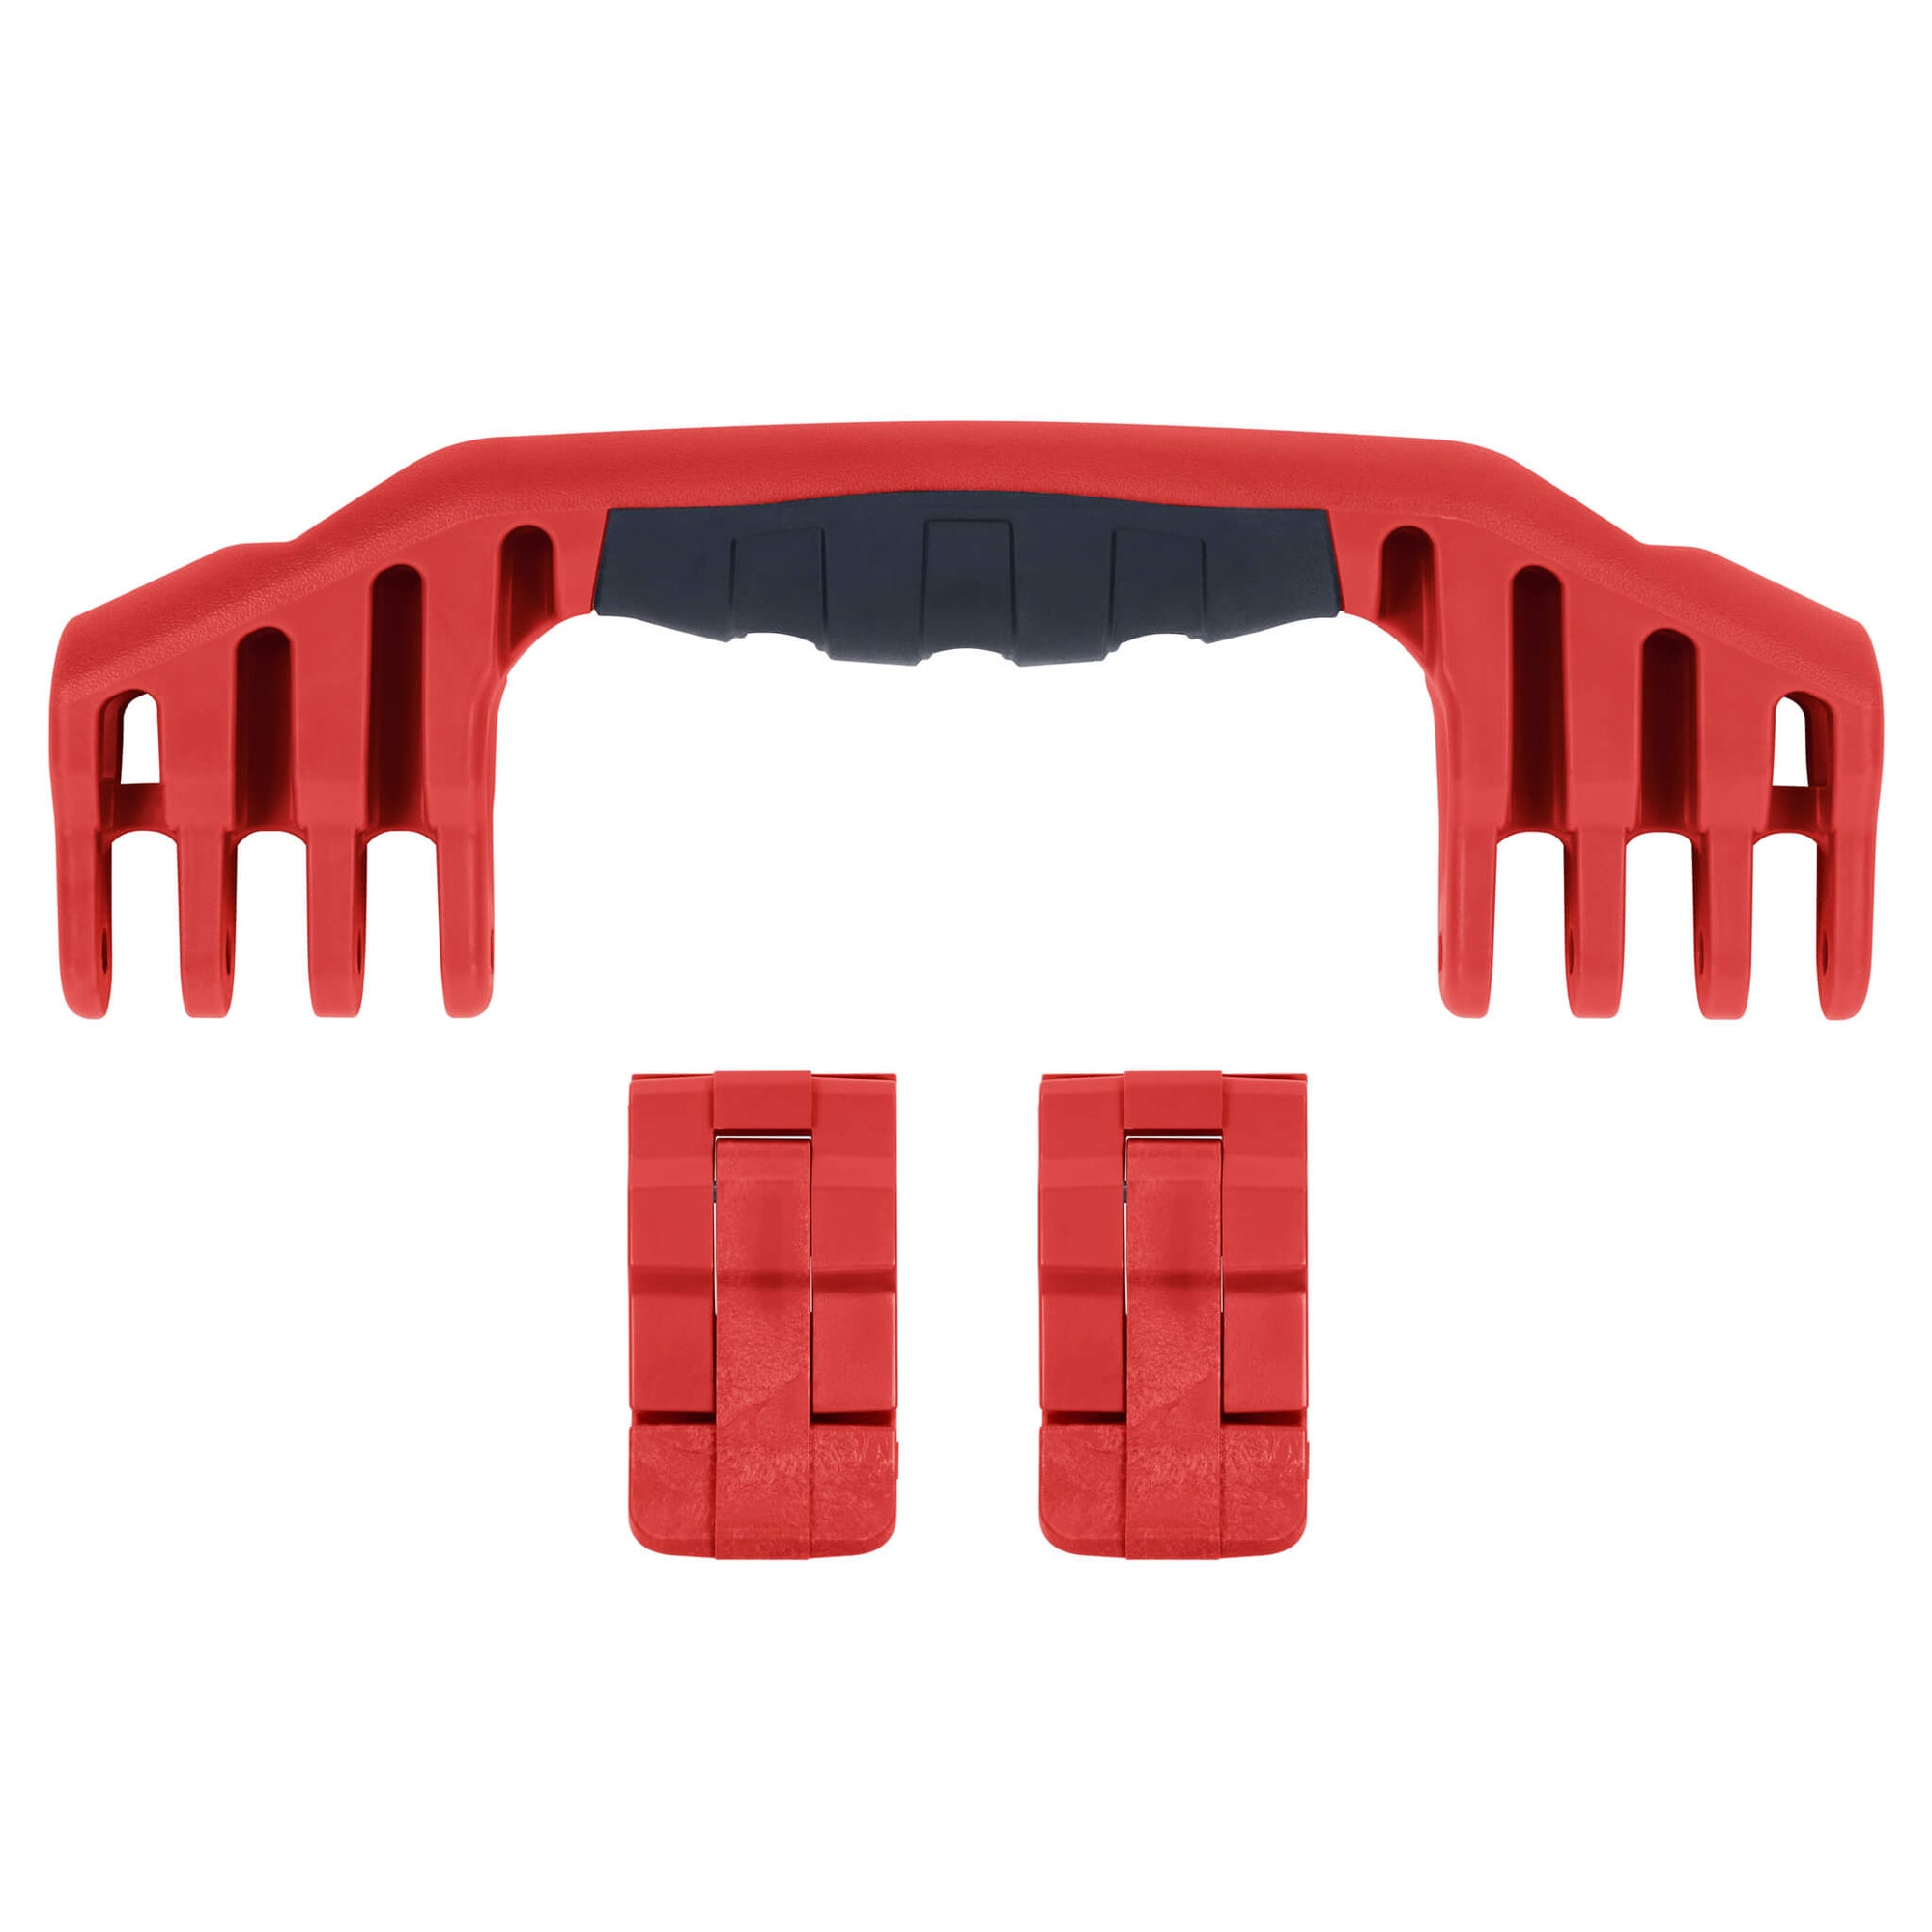 Pelican 1550 Replacement Handle & Latches, Red (Set of 1 Handle, 2 Latches) ColorCase 